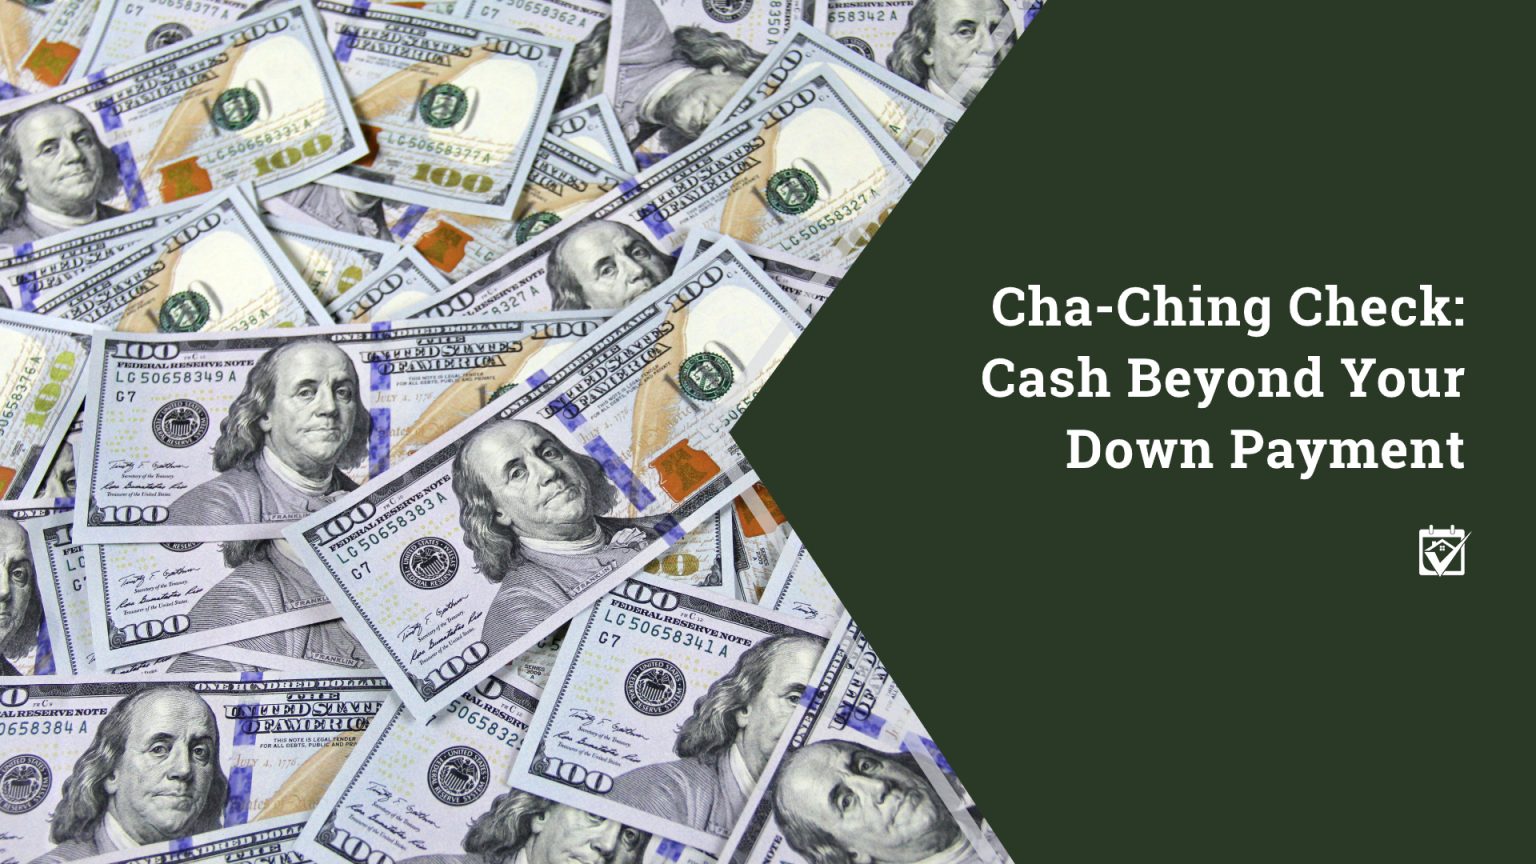 Cash Beyond Your Down Payment